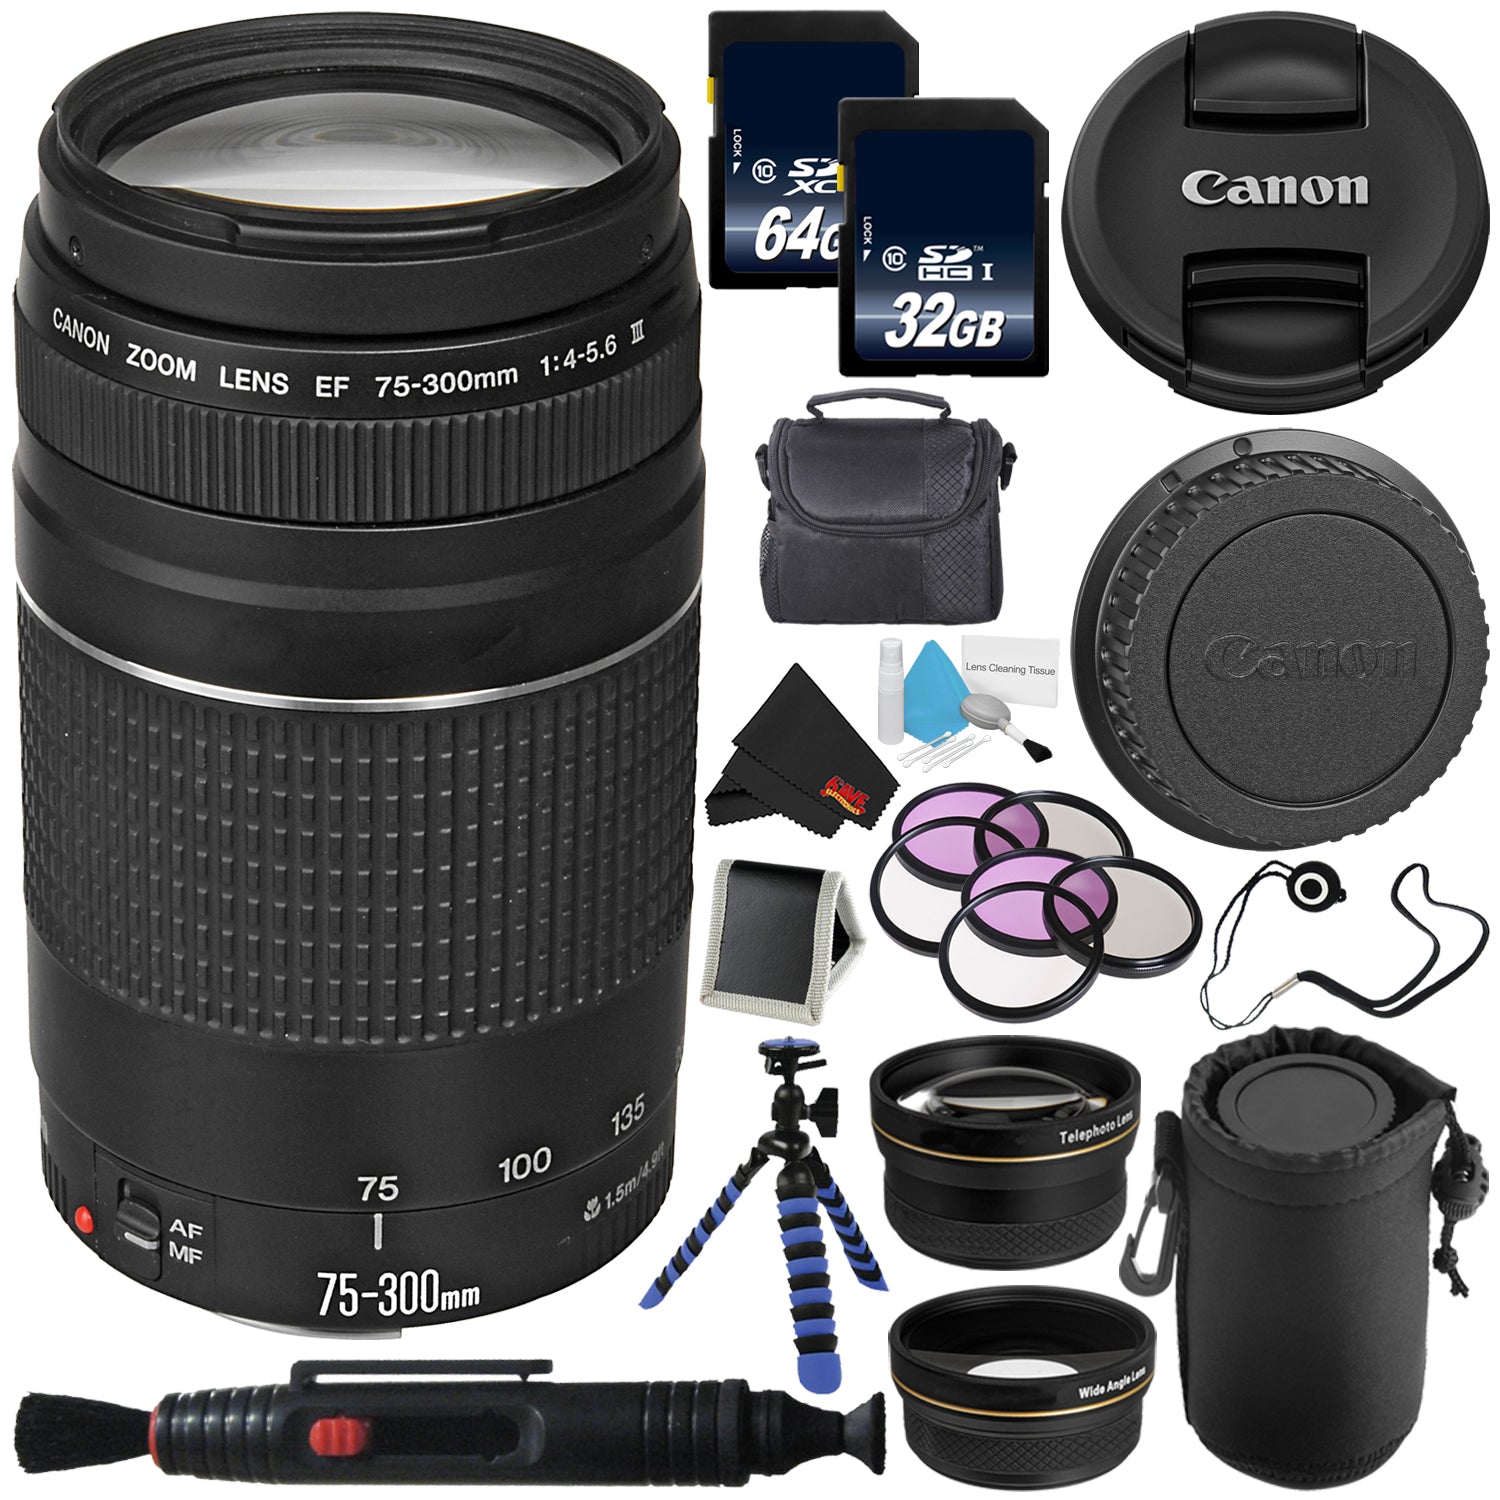 Canon EF 75-300mm f/4-5.6 III Telephoto Zoom Lens 6473A003 + Lens Pen Cleaner + Deluxe Lens Pouch + 58mm 3 Piece Filter Kit + Deluxe Cleaning Kit +